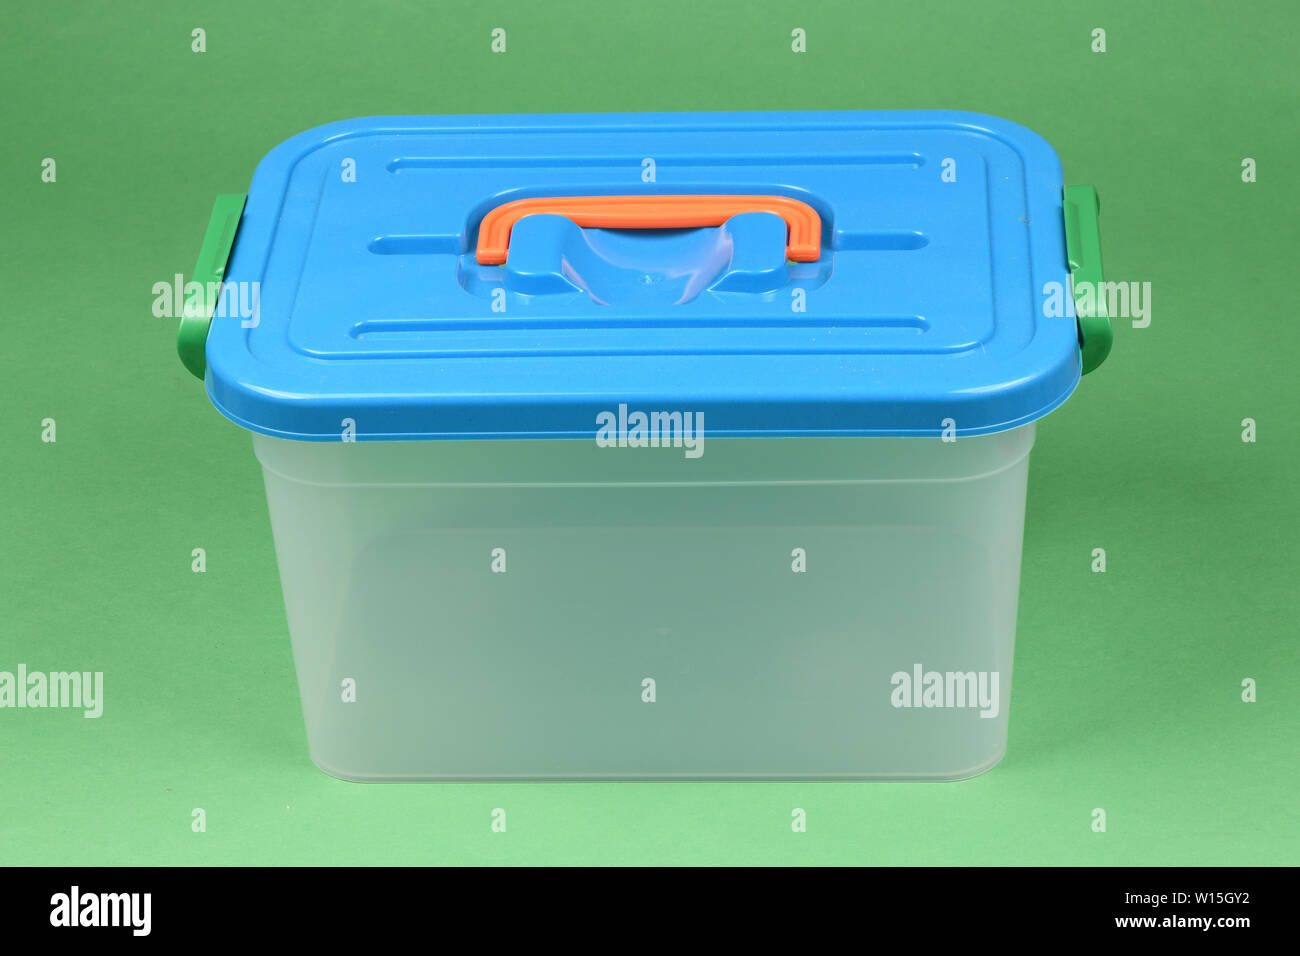 https://c8.alamy.com/comp/W15GY2/food-plastic-box-isolated-on-green-background-high-resolution-photo-full-depth-of-field-W15GY2.jpg